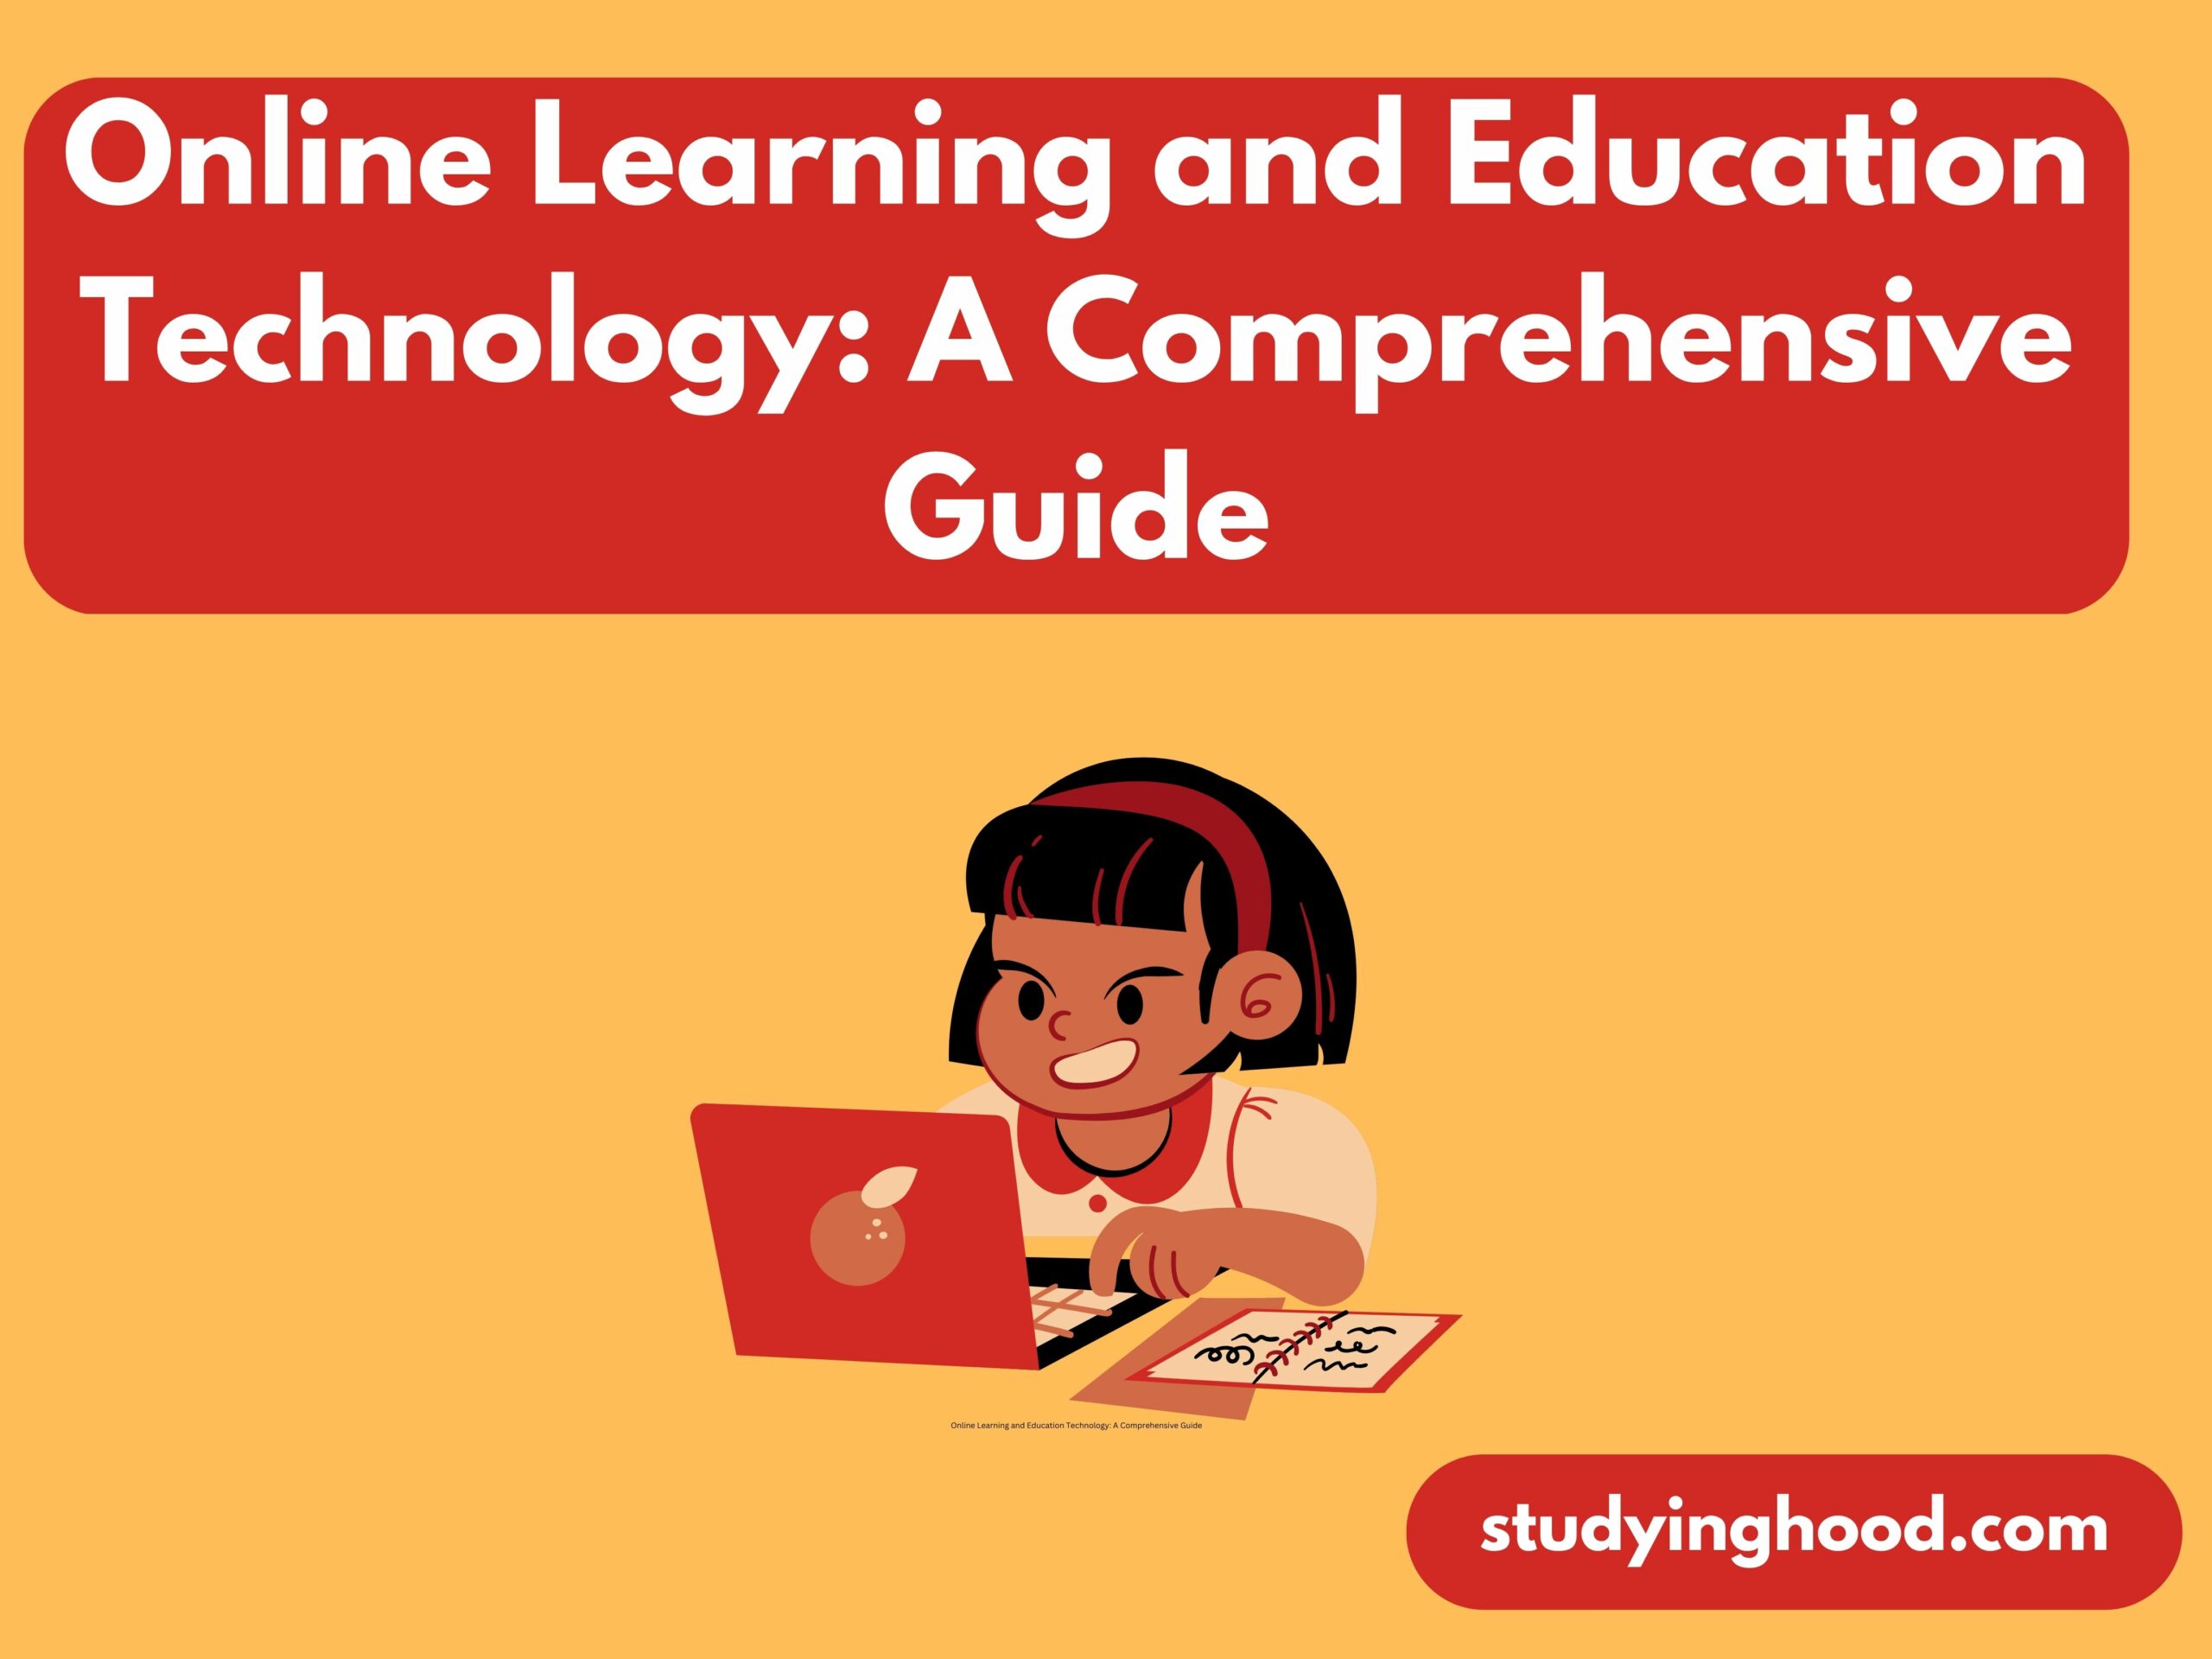 Online Learning and Education Technology: A Comprehensive Guide